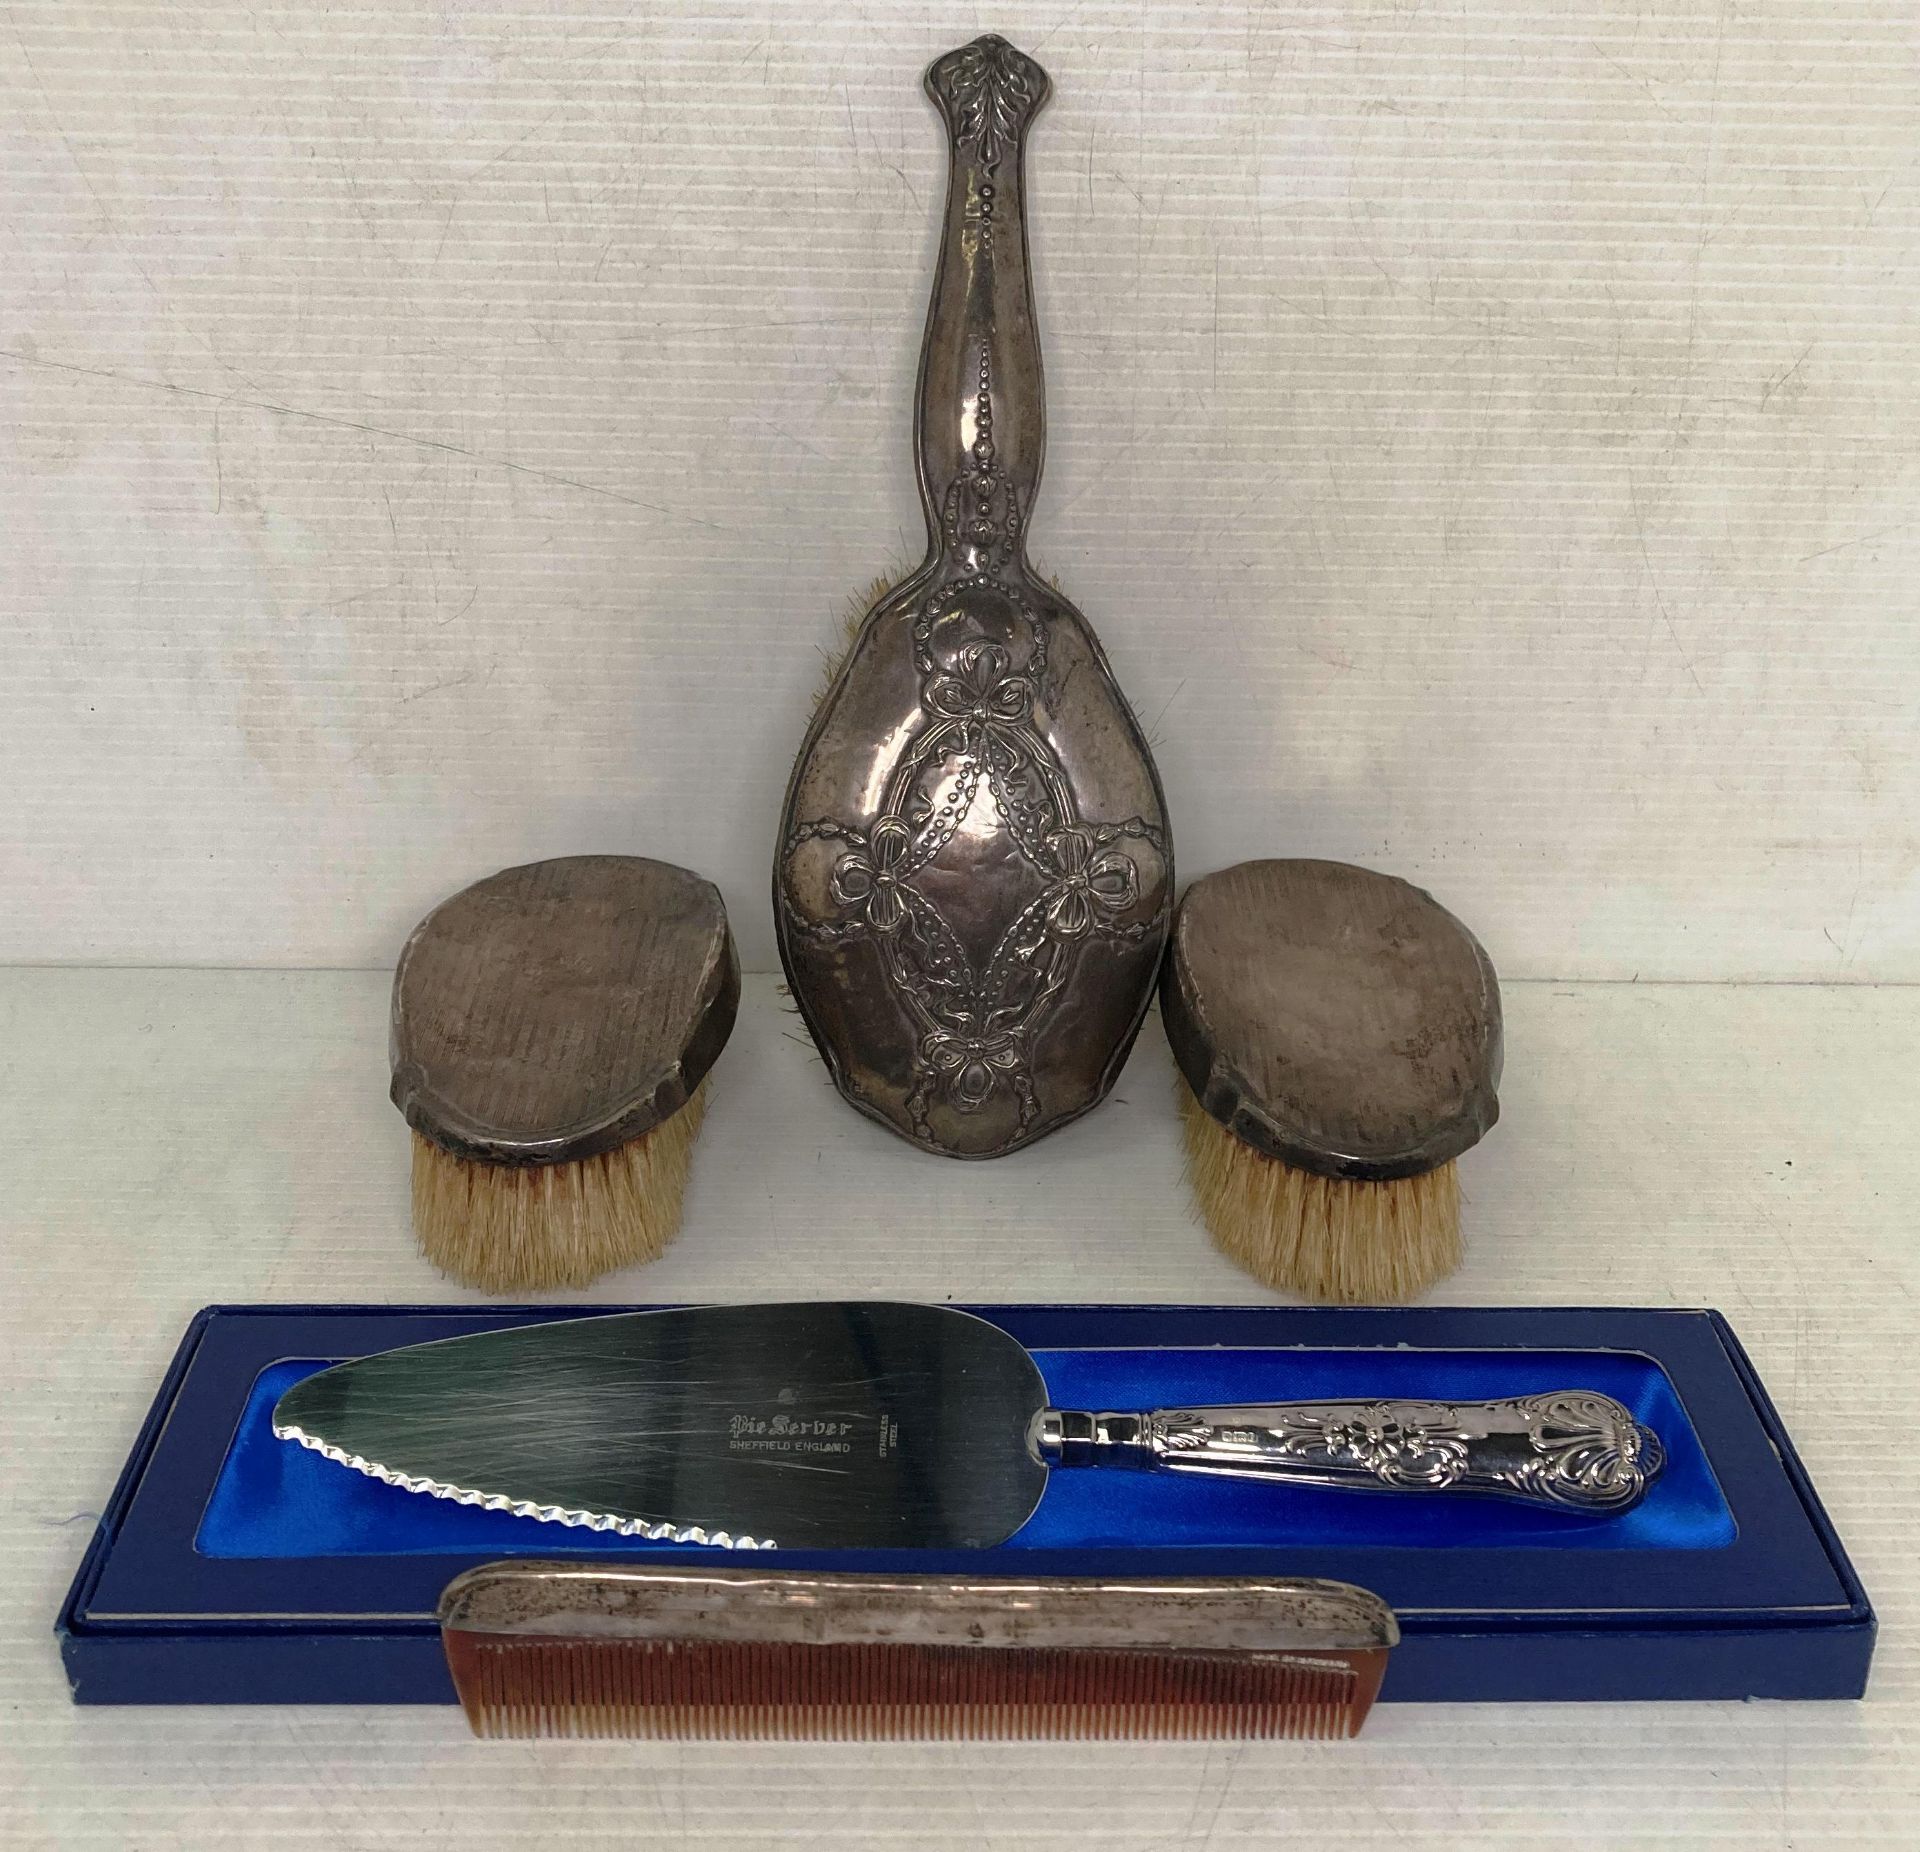 Five silver [hallmarked] items, two clothes brushes with matching comb, 1925, hair brush 1909,